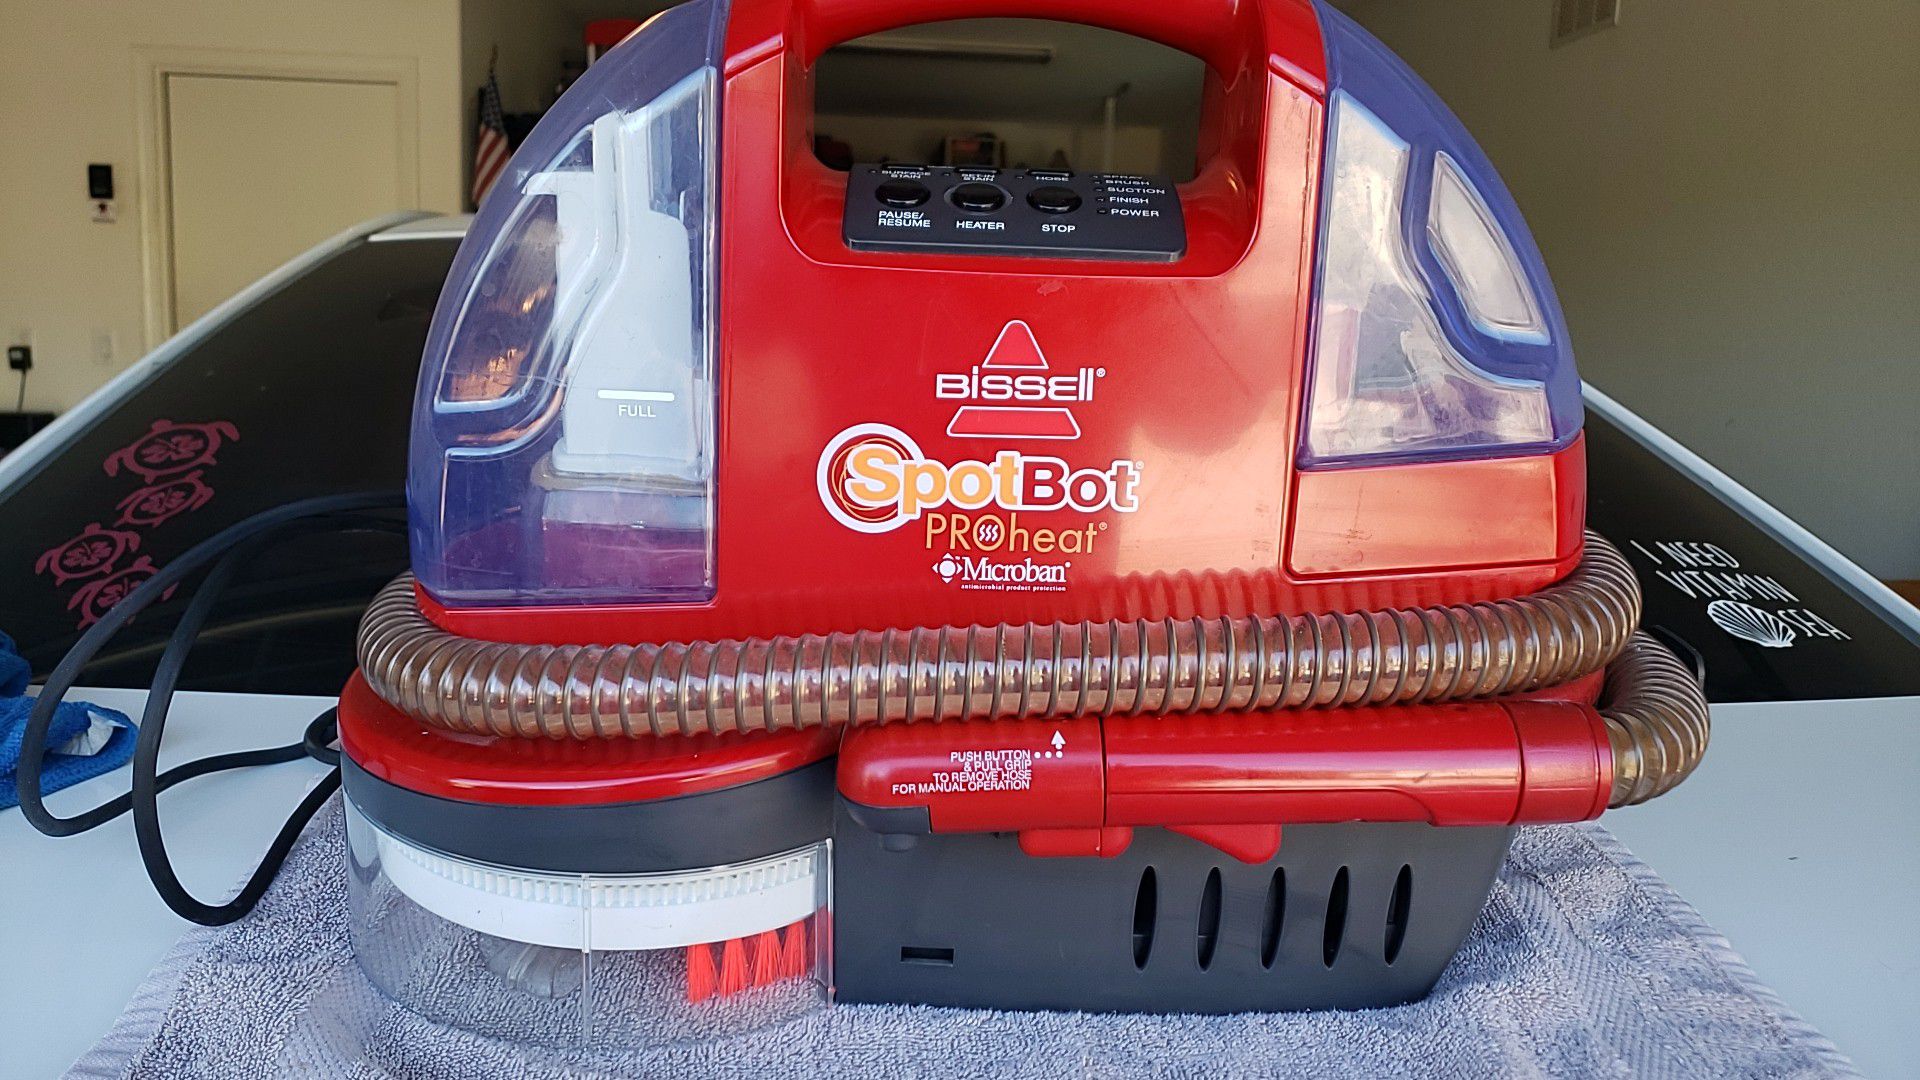 Bissell SpotBot ProHeat Carpet Cleaner